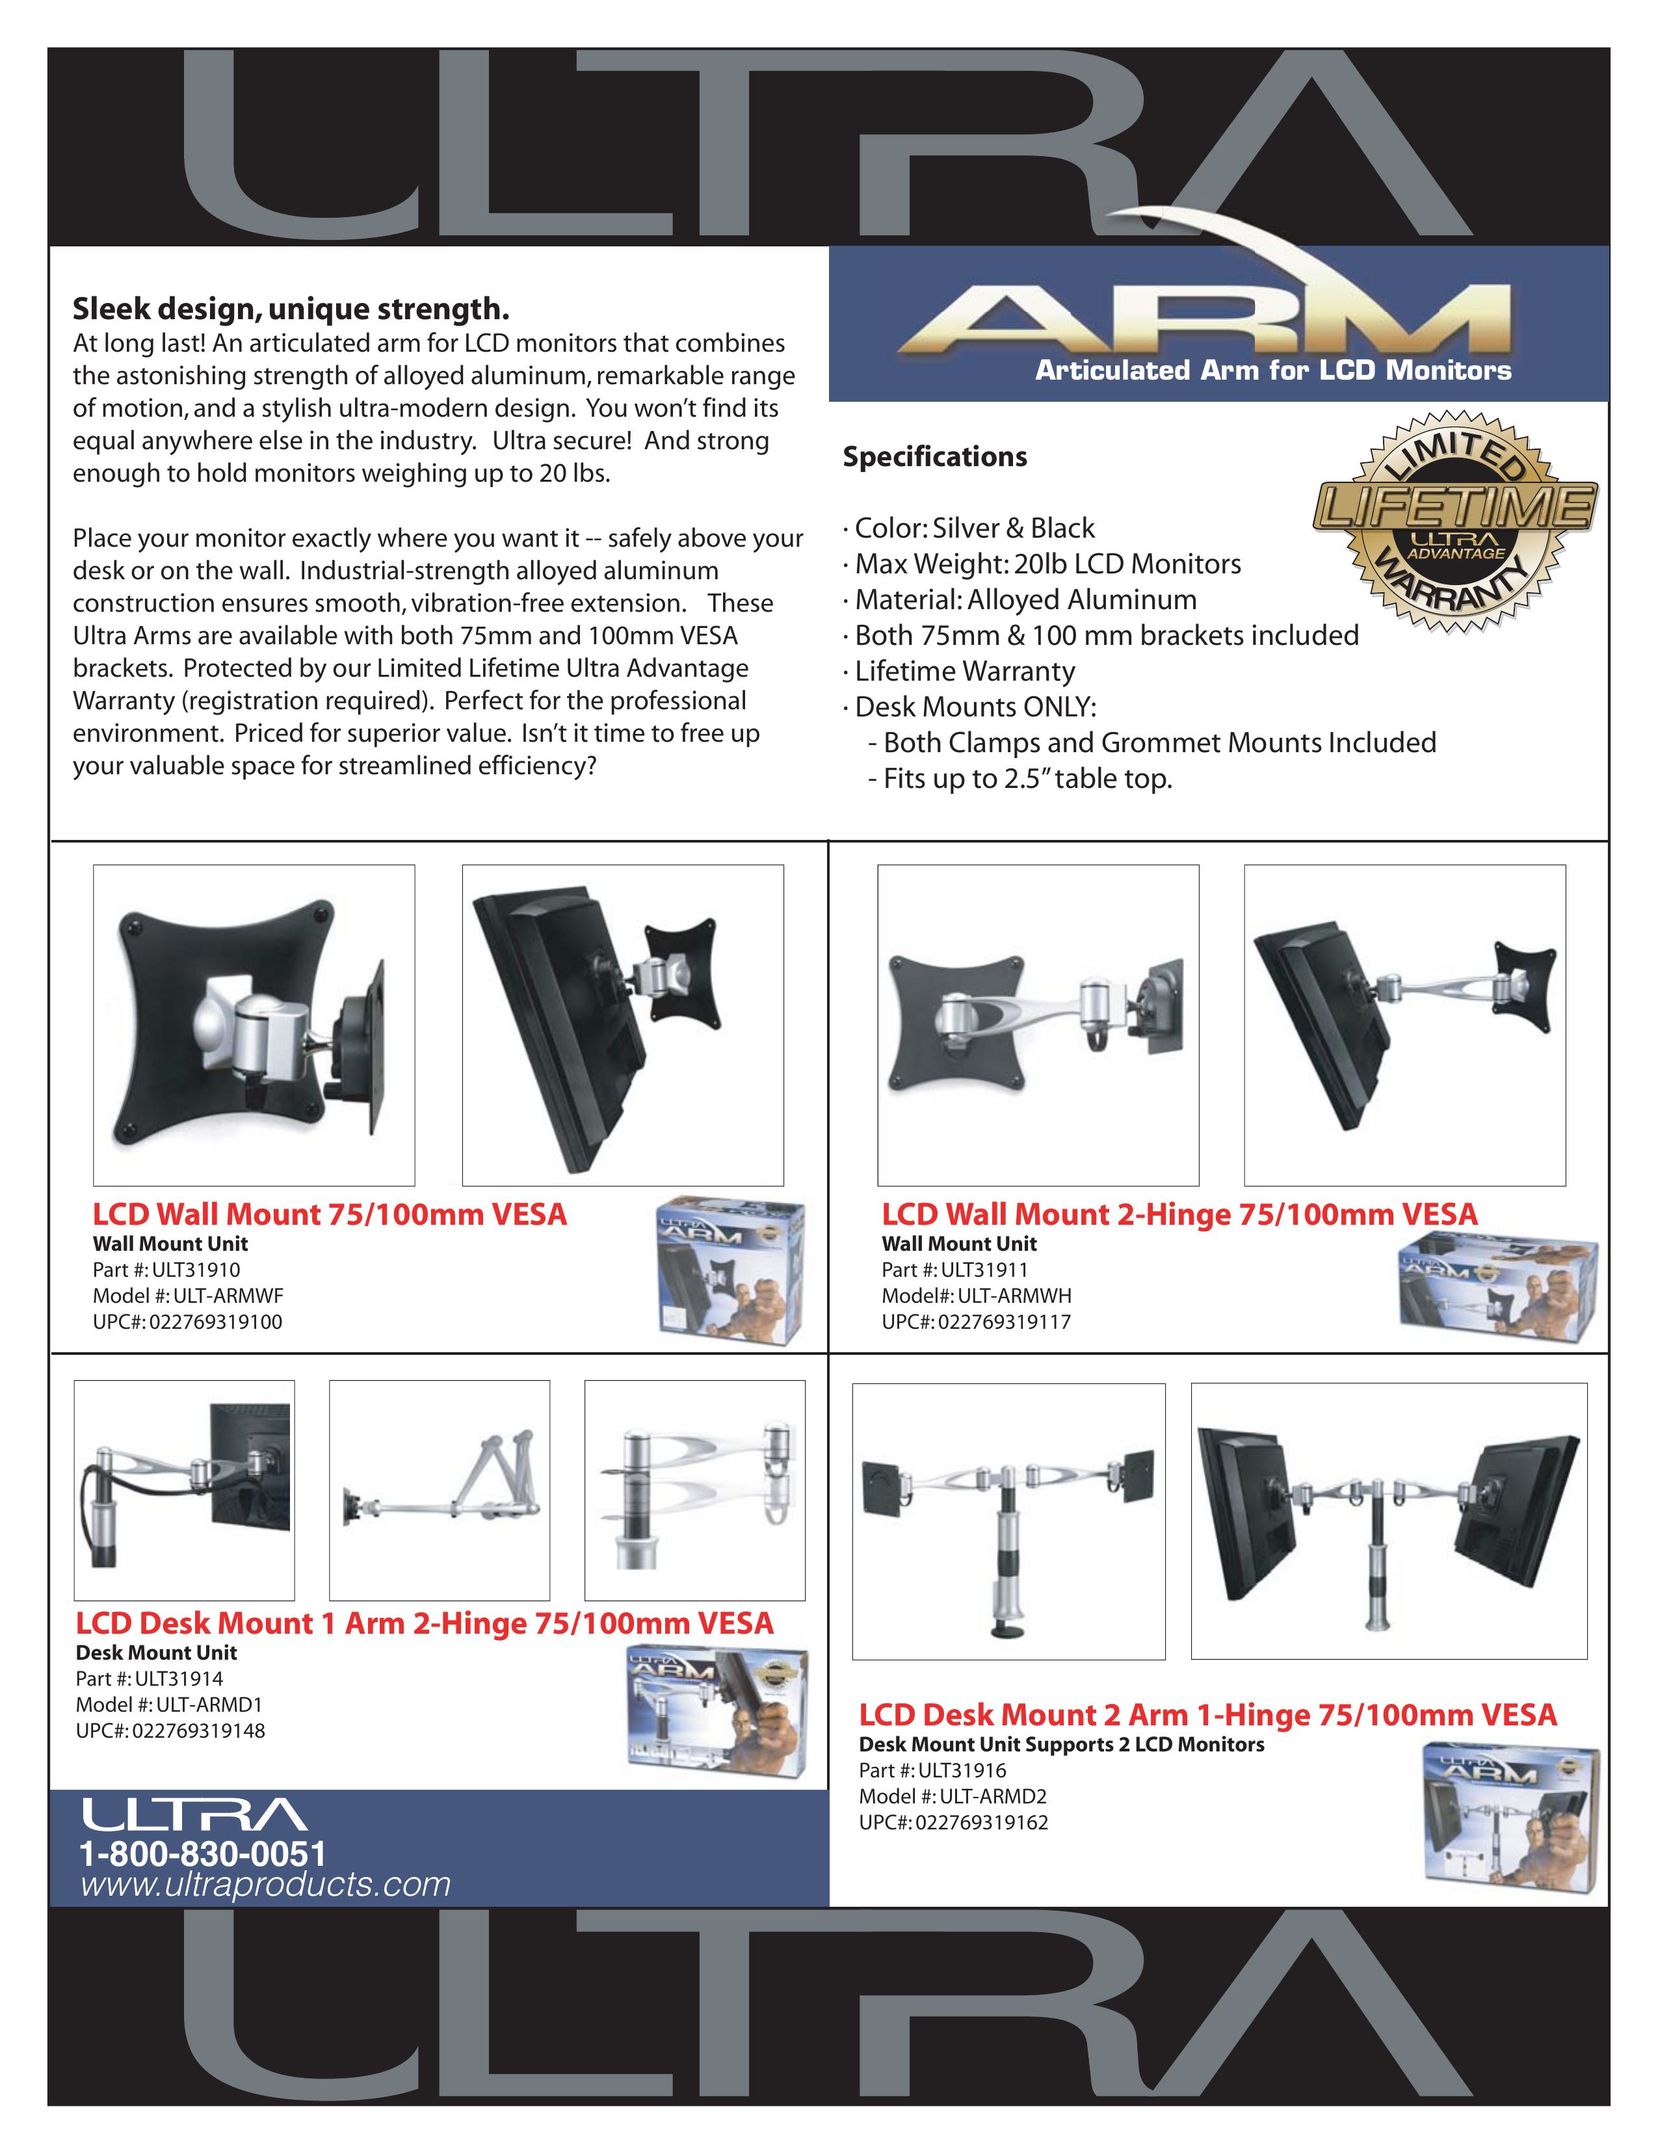 Ultra Products ULT-ARMWF Indoor Furnishings User Manual